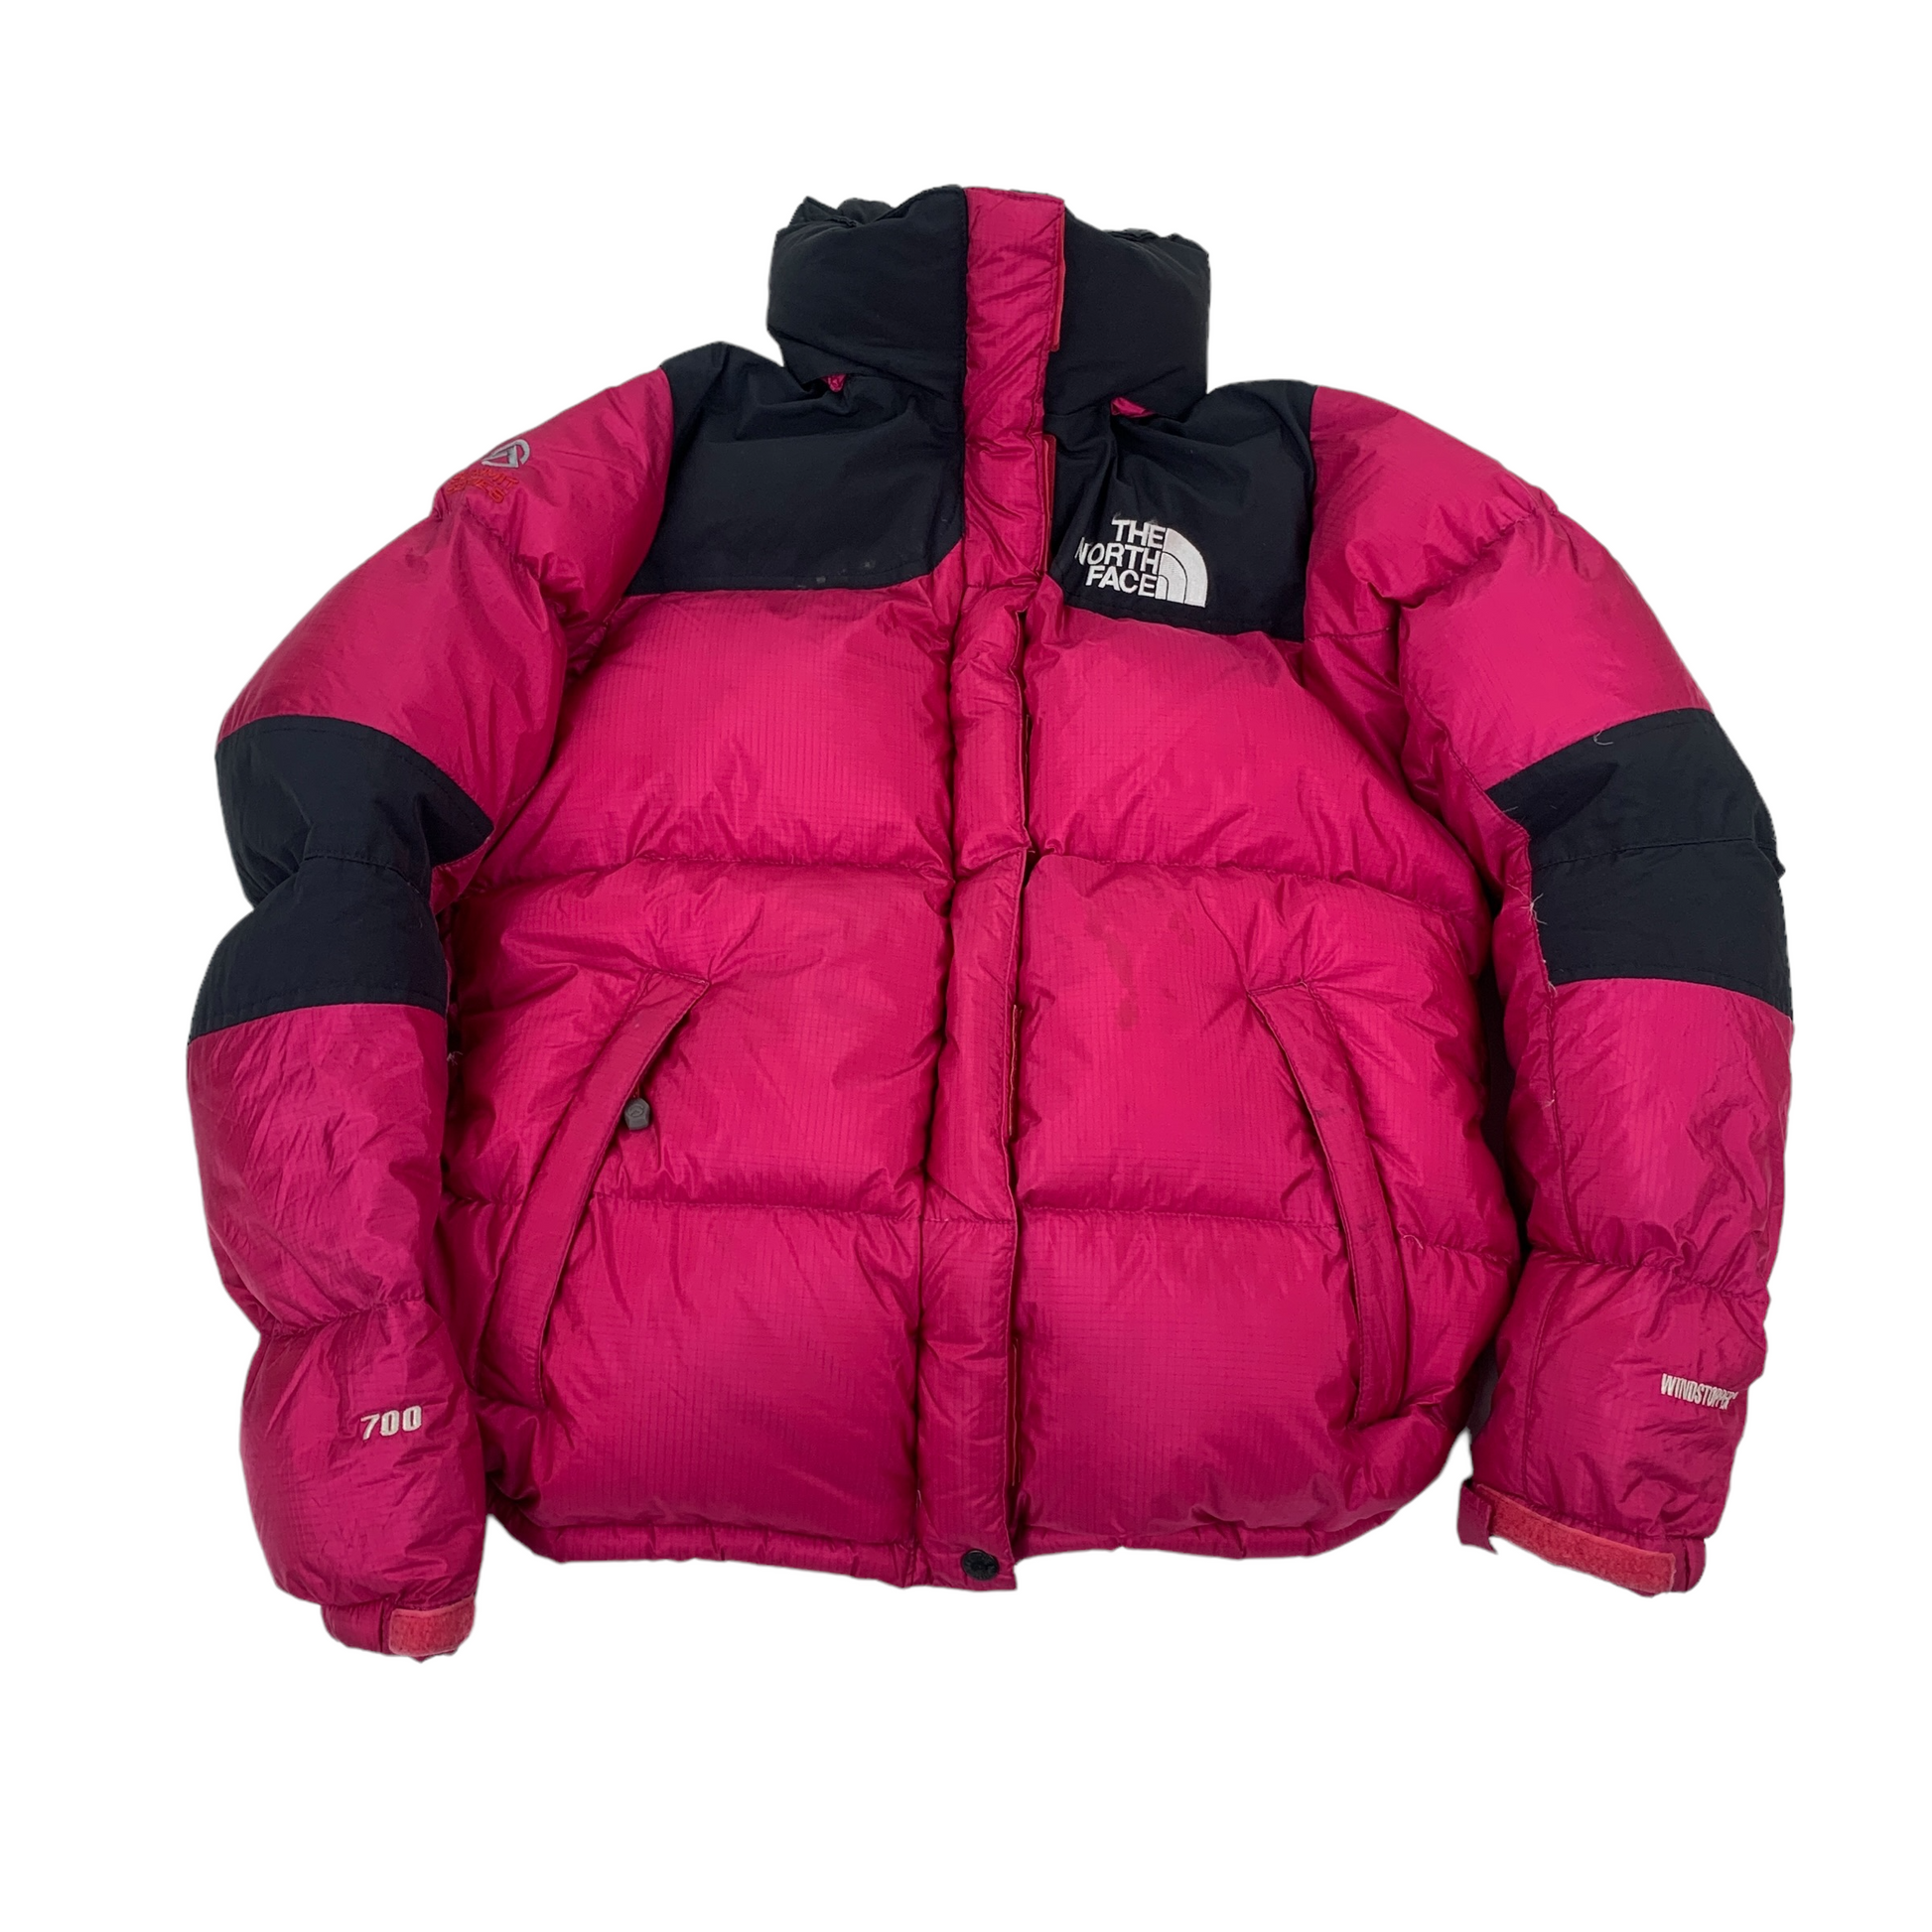 North Face 700 Baltoro Windstopper Jacke / Nuptse-The North Face-pufferseason-secondhand-shop-austria-vintage-puffer-down-coat-sustainable